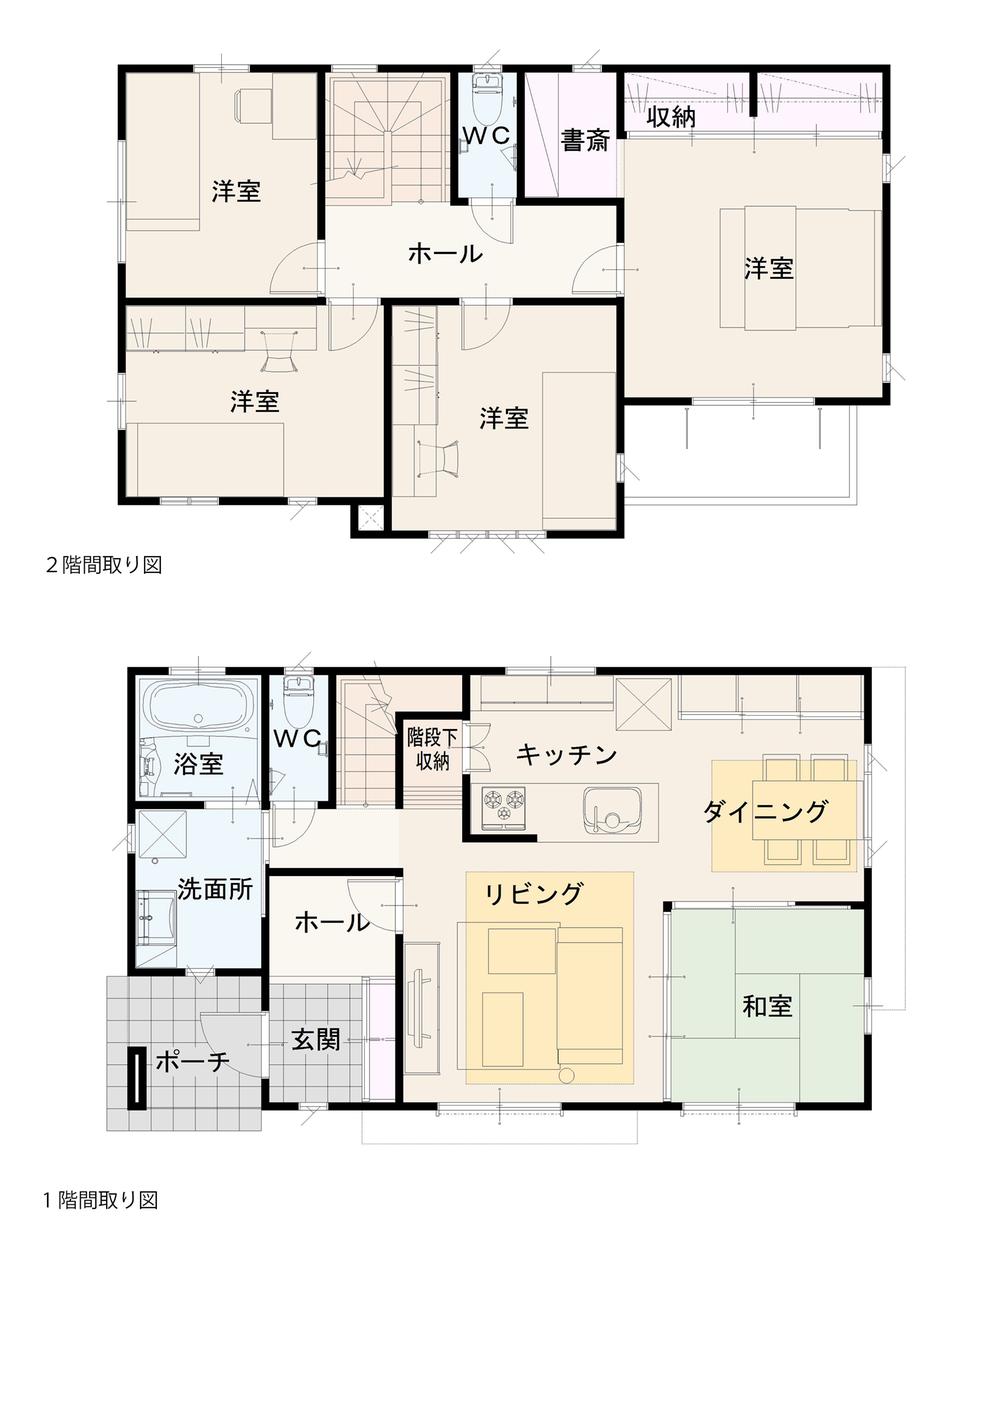 Floor plan. Tsuchiura Exhibition Centre, Tsuchiura ion offers a comprehensive housing exhibition hall of the adjacent.  "live, Bring up, have fun. Theme in the housing and mom café ", House to fulfill a "want" of Mrs. pets corner. 